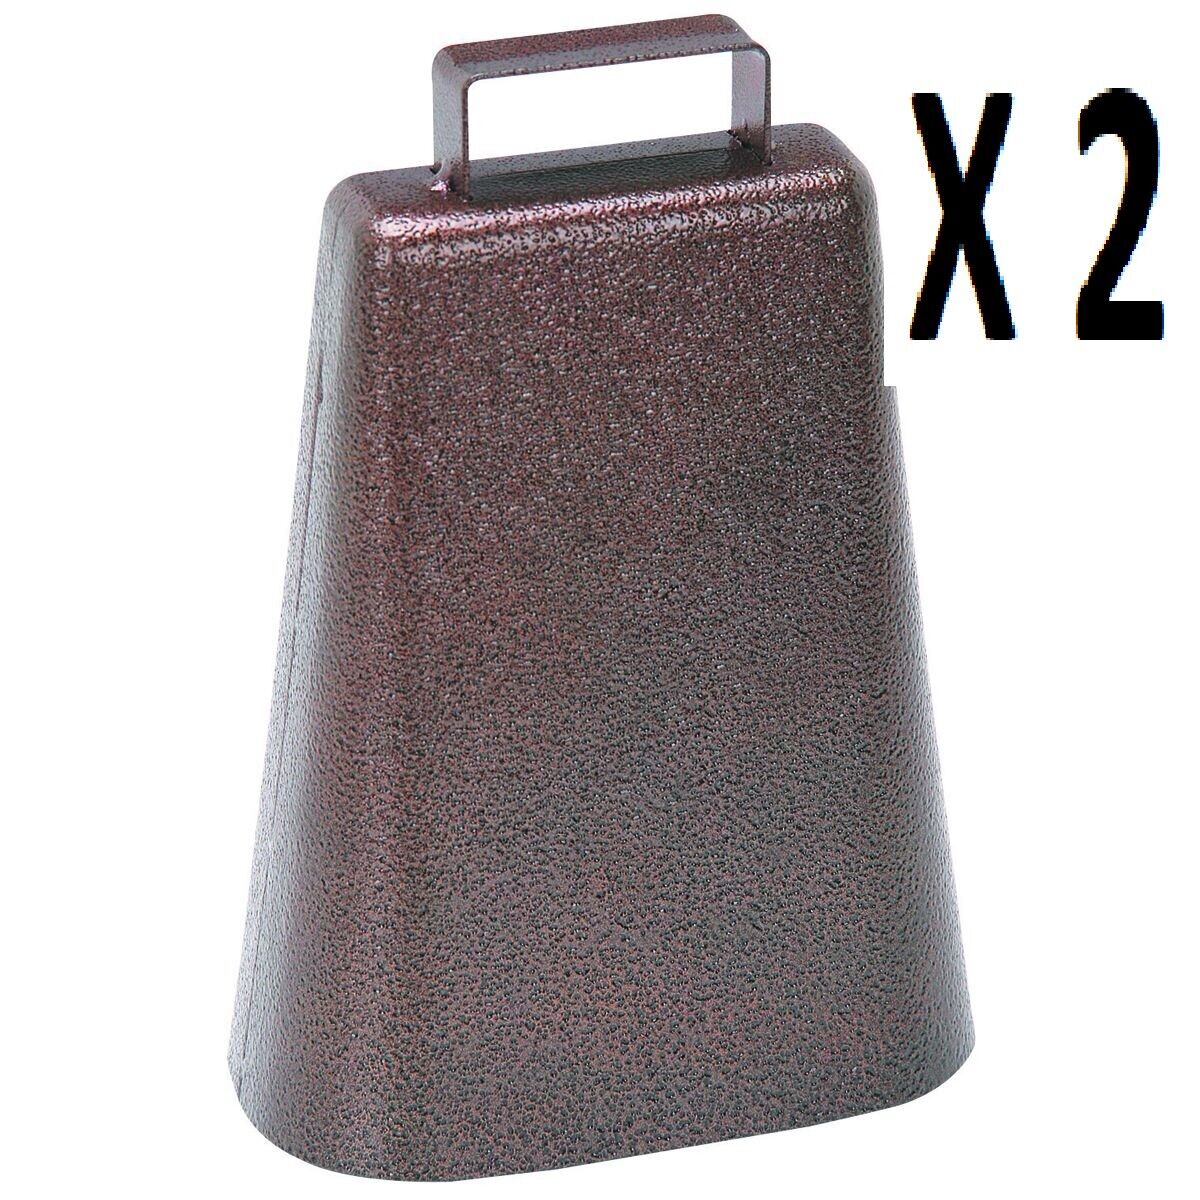 7 Inch Steel Cow Bell with Handle and Antique Copper Finish  (2 Pack)